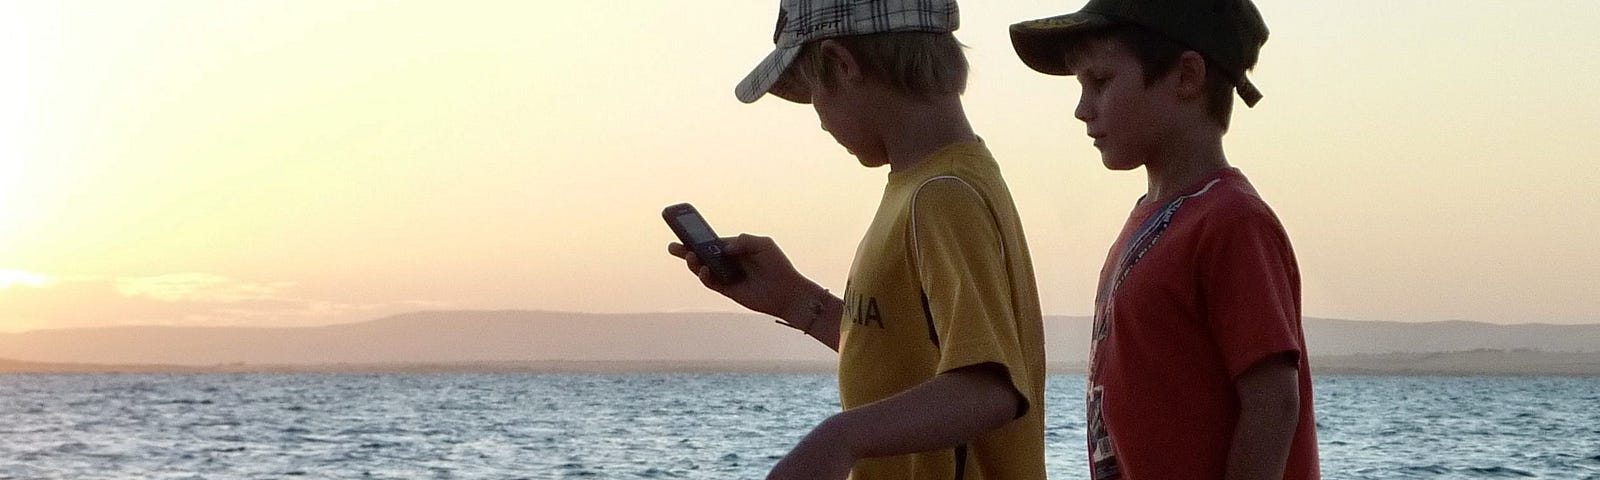 Two boys standing in twilight searching for information on a mobile phone